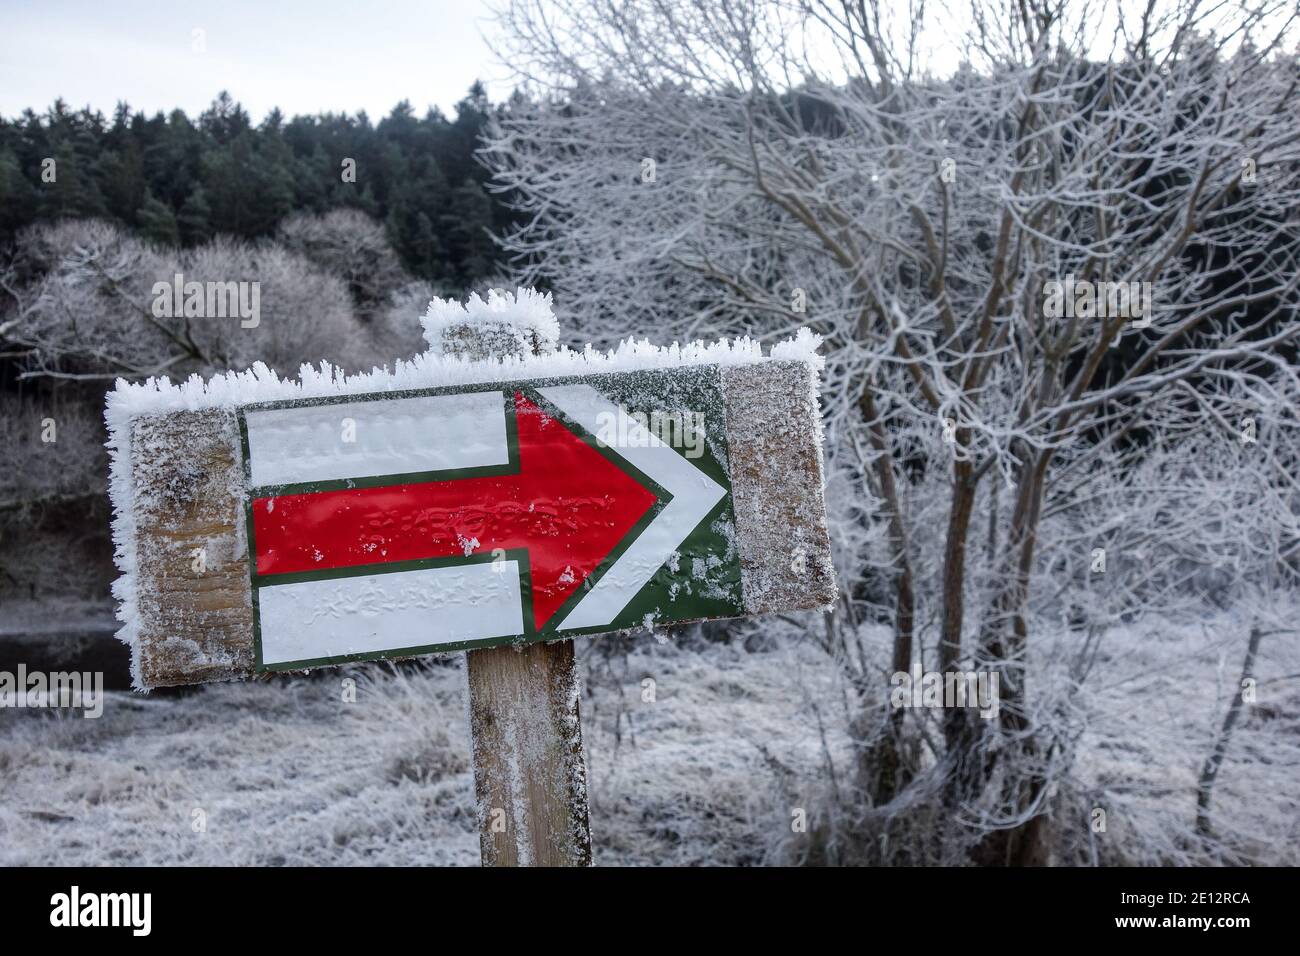 Tourist trail marking (trail blazing) in the Czech Republic. Painted red mark in winter covered in snow. Stock Photo